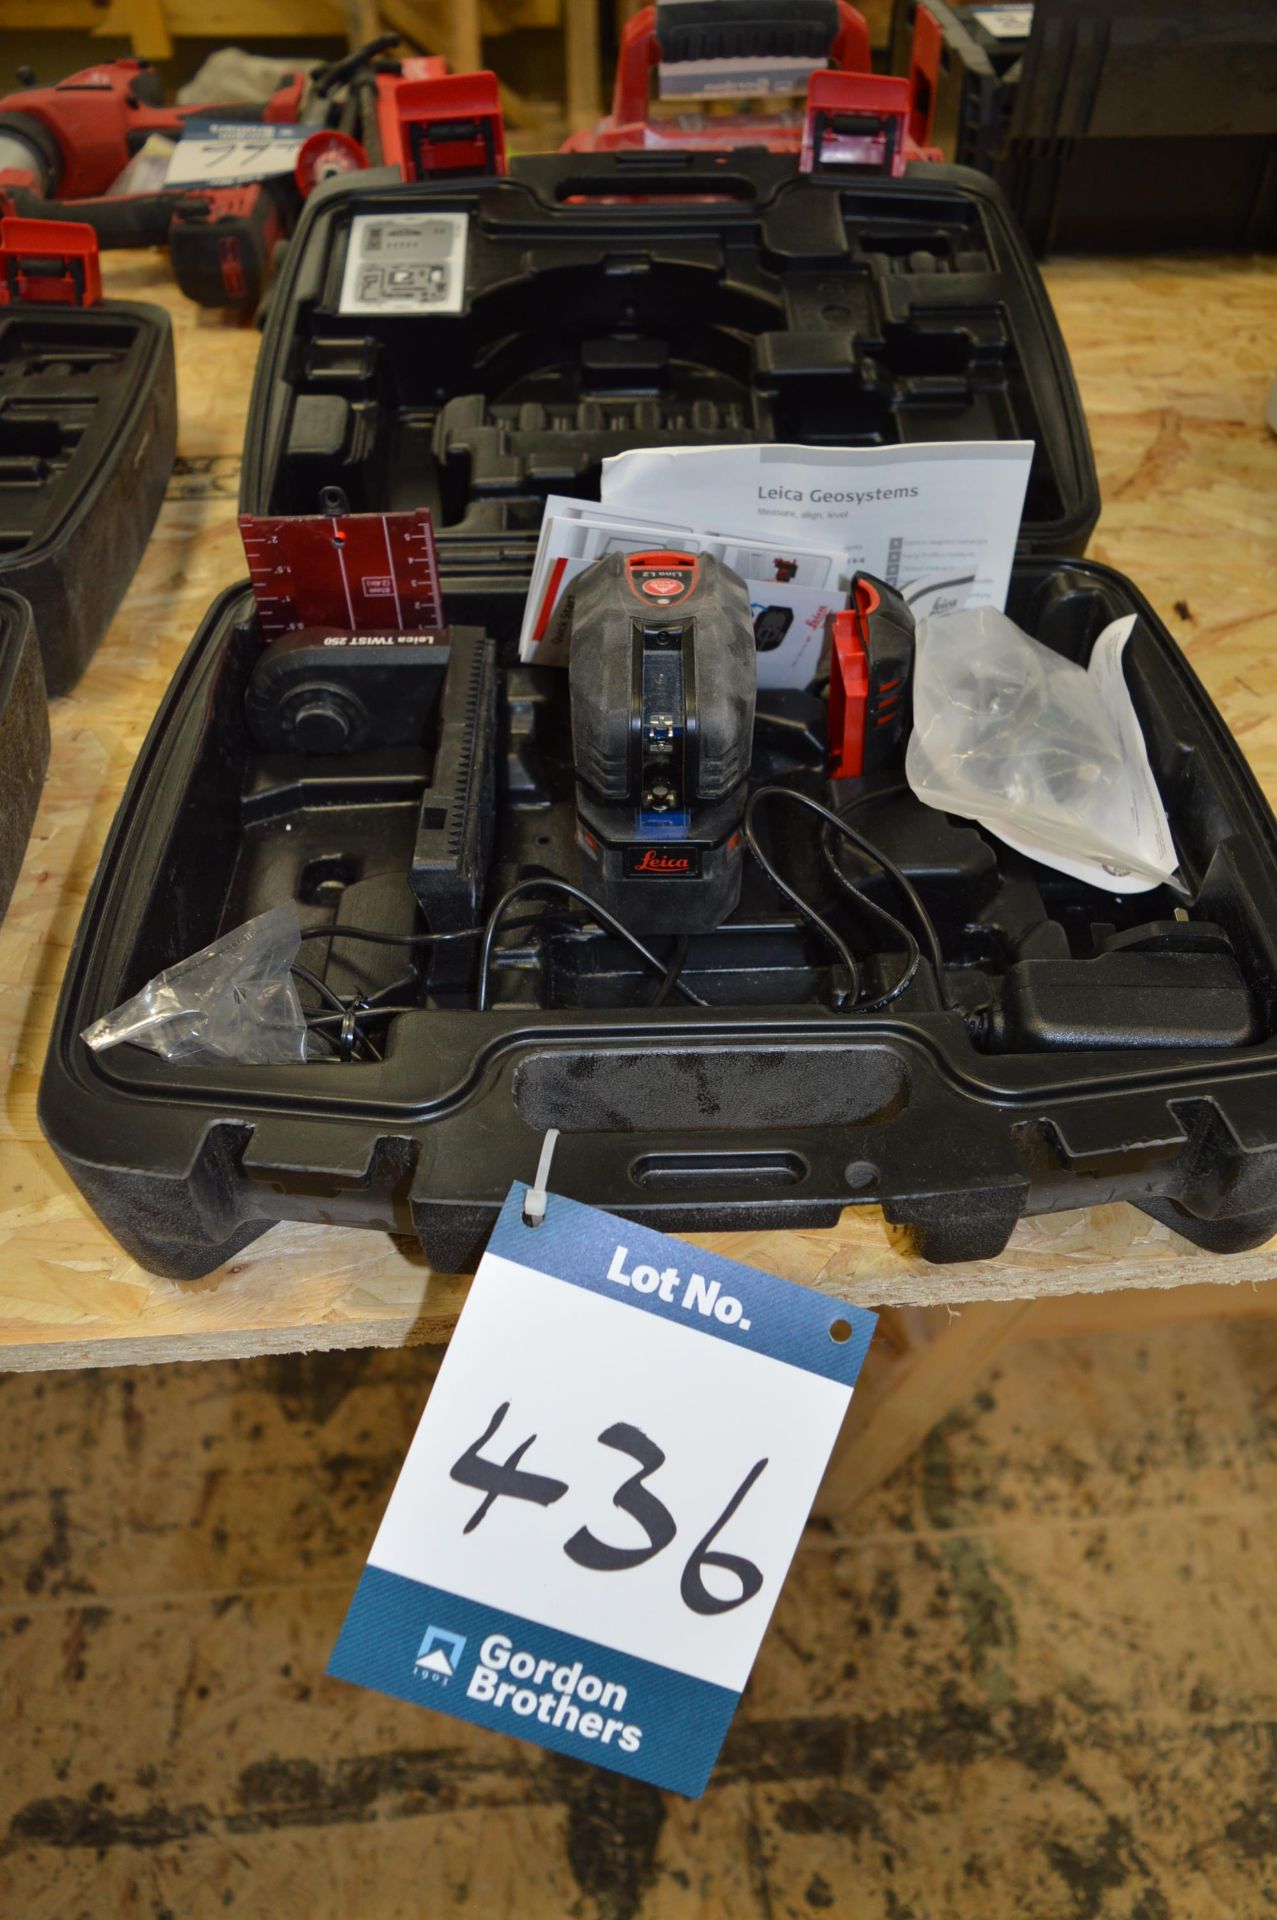 Leica, laser level, Model LINO L2-1 with carry case